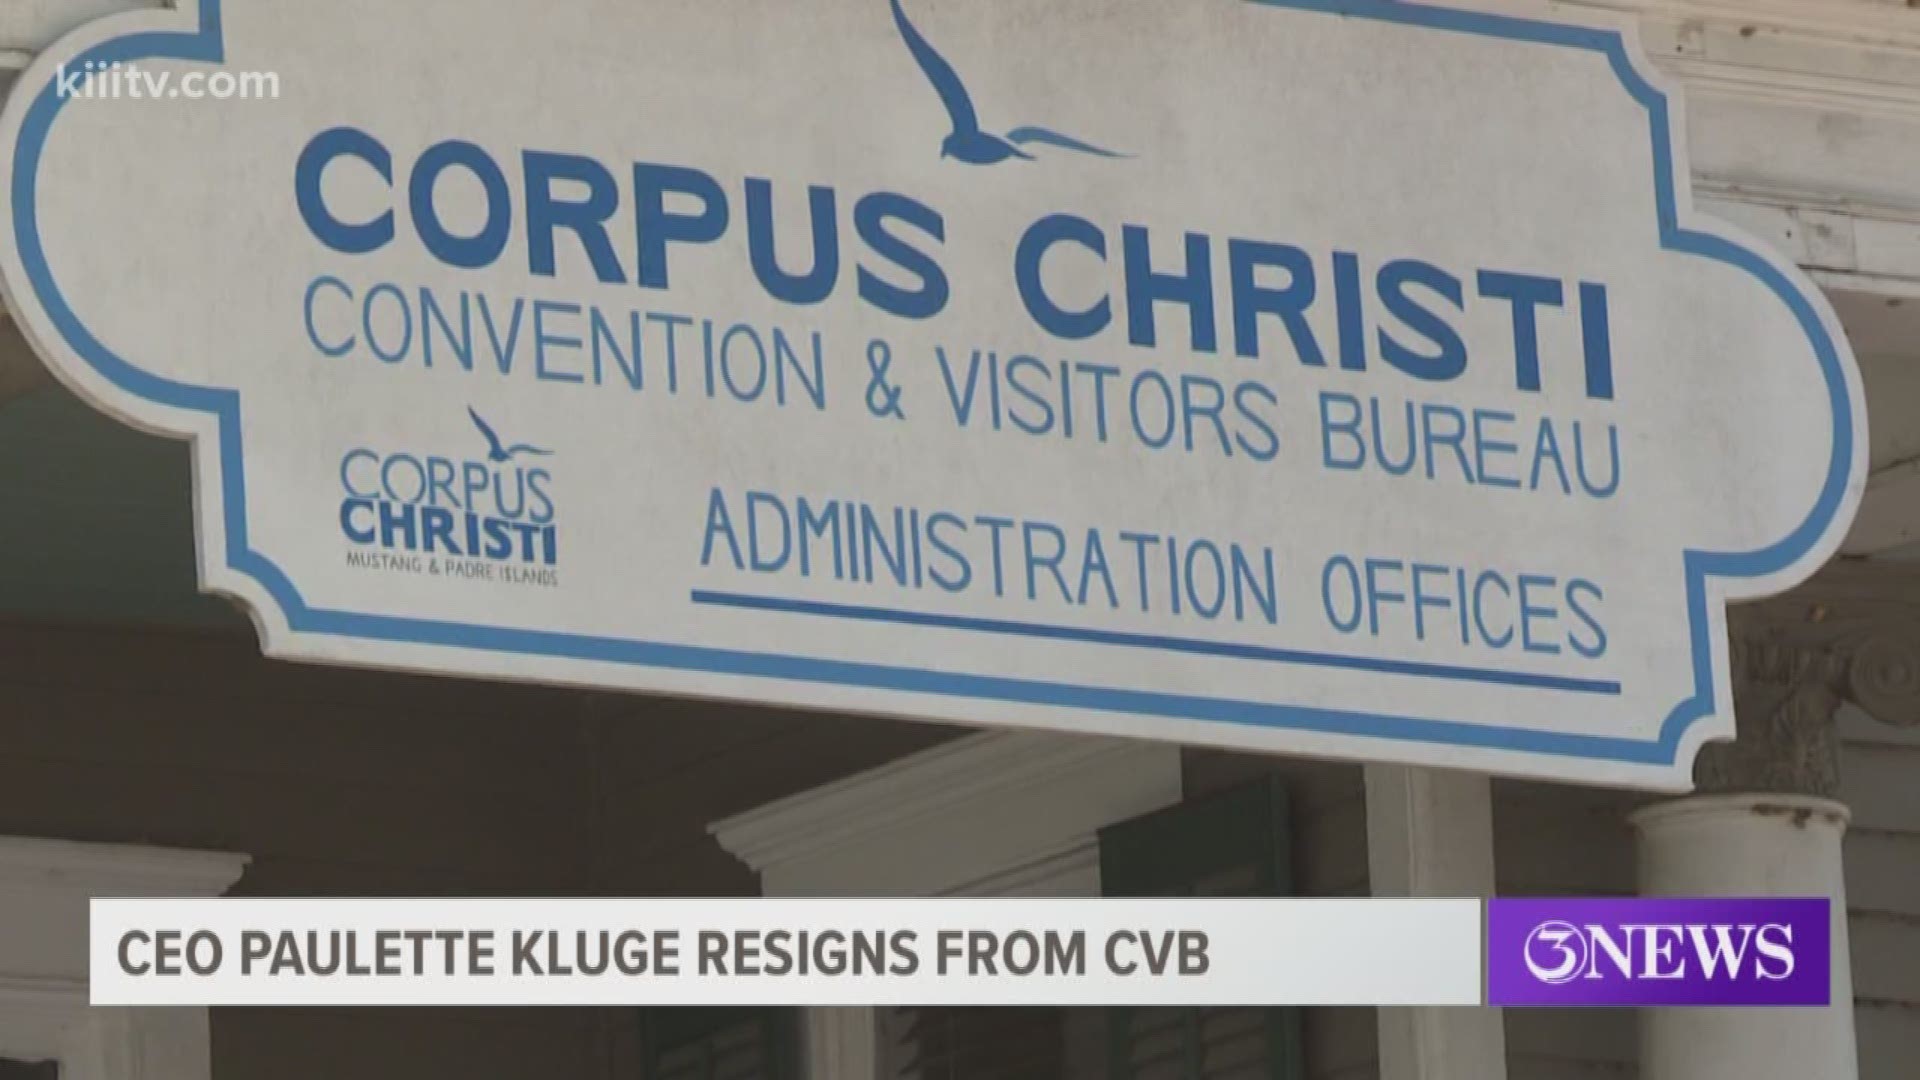 Paulette Kluge, CEO of the Corpus Christi Convention and Visitors Bureau, resigned from her position in a closed session during a board meeting Thursday.